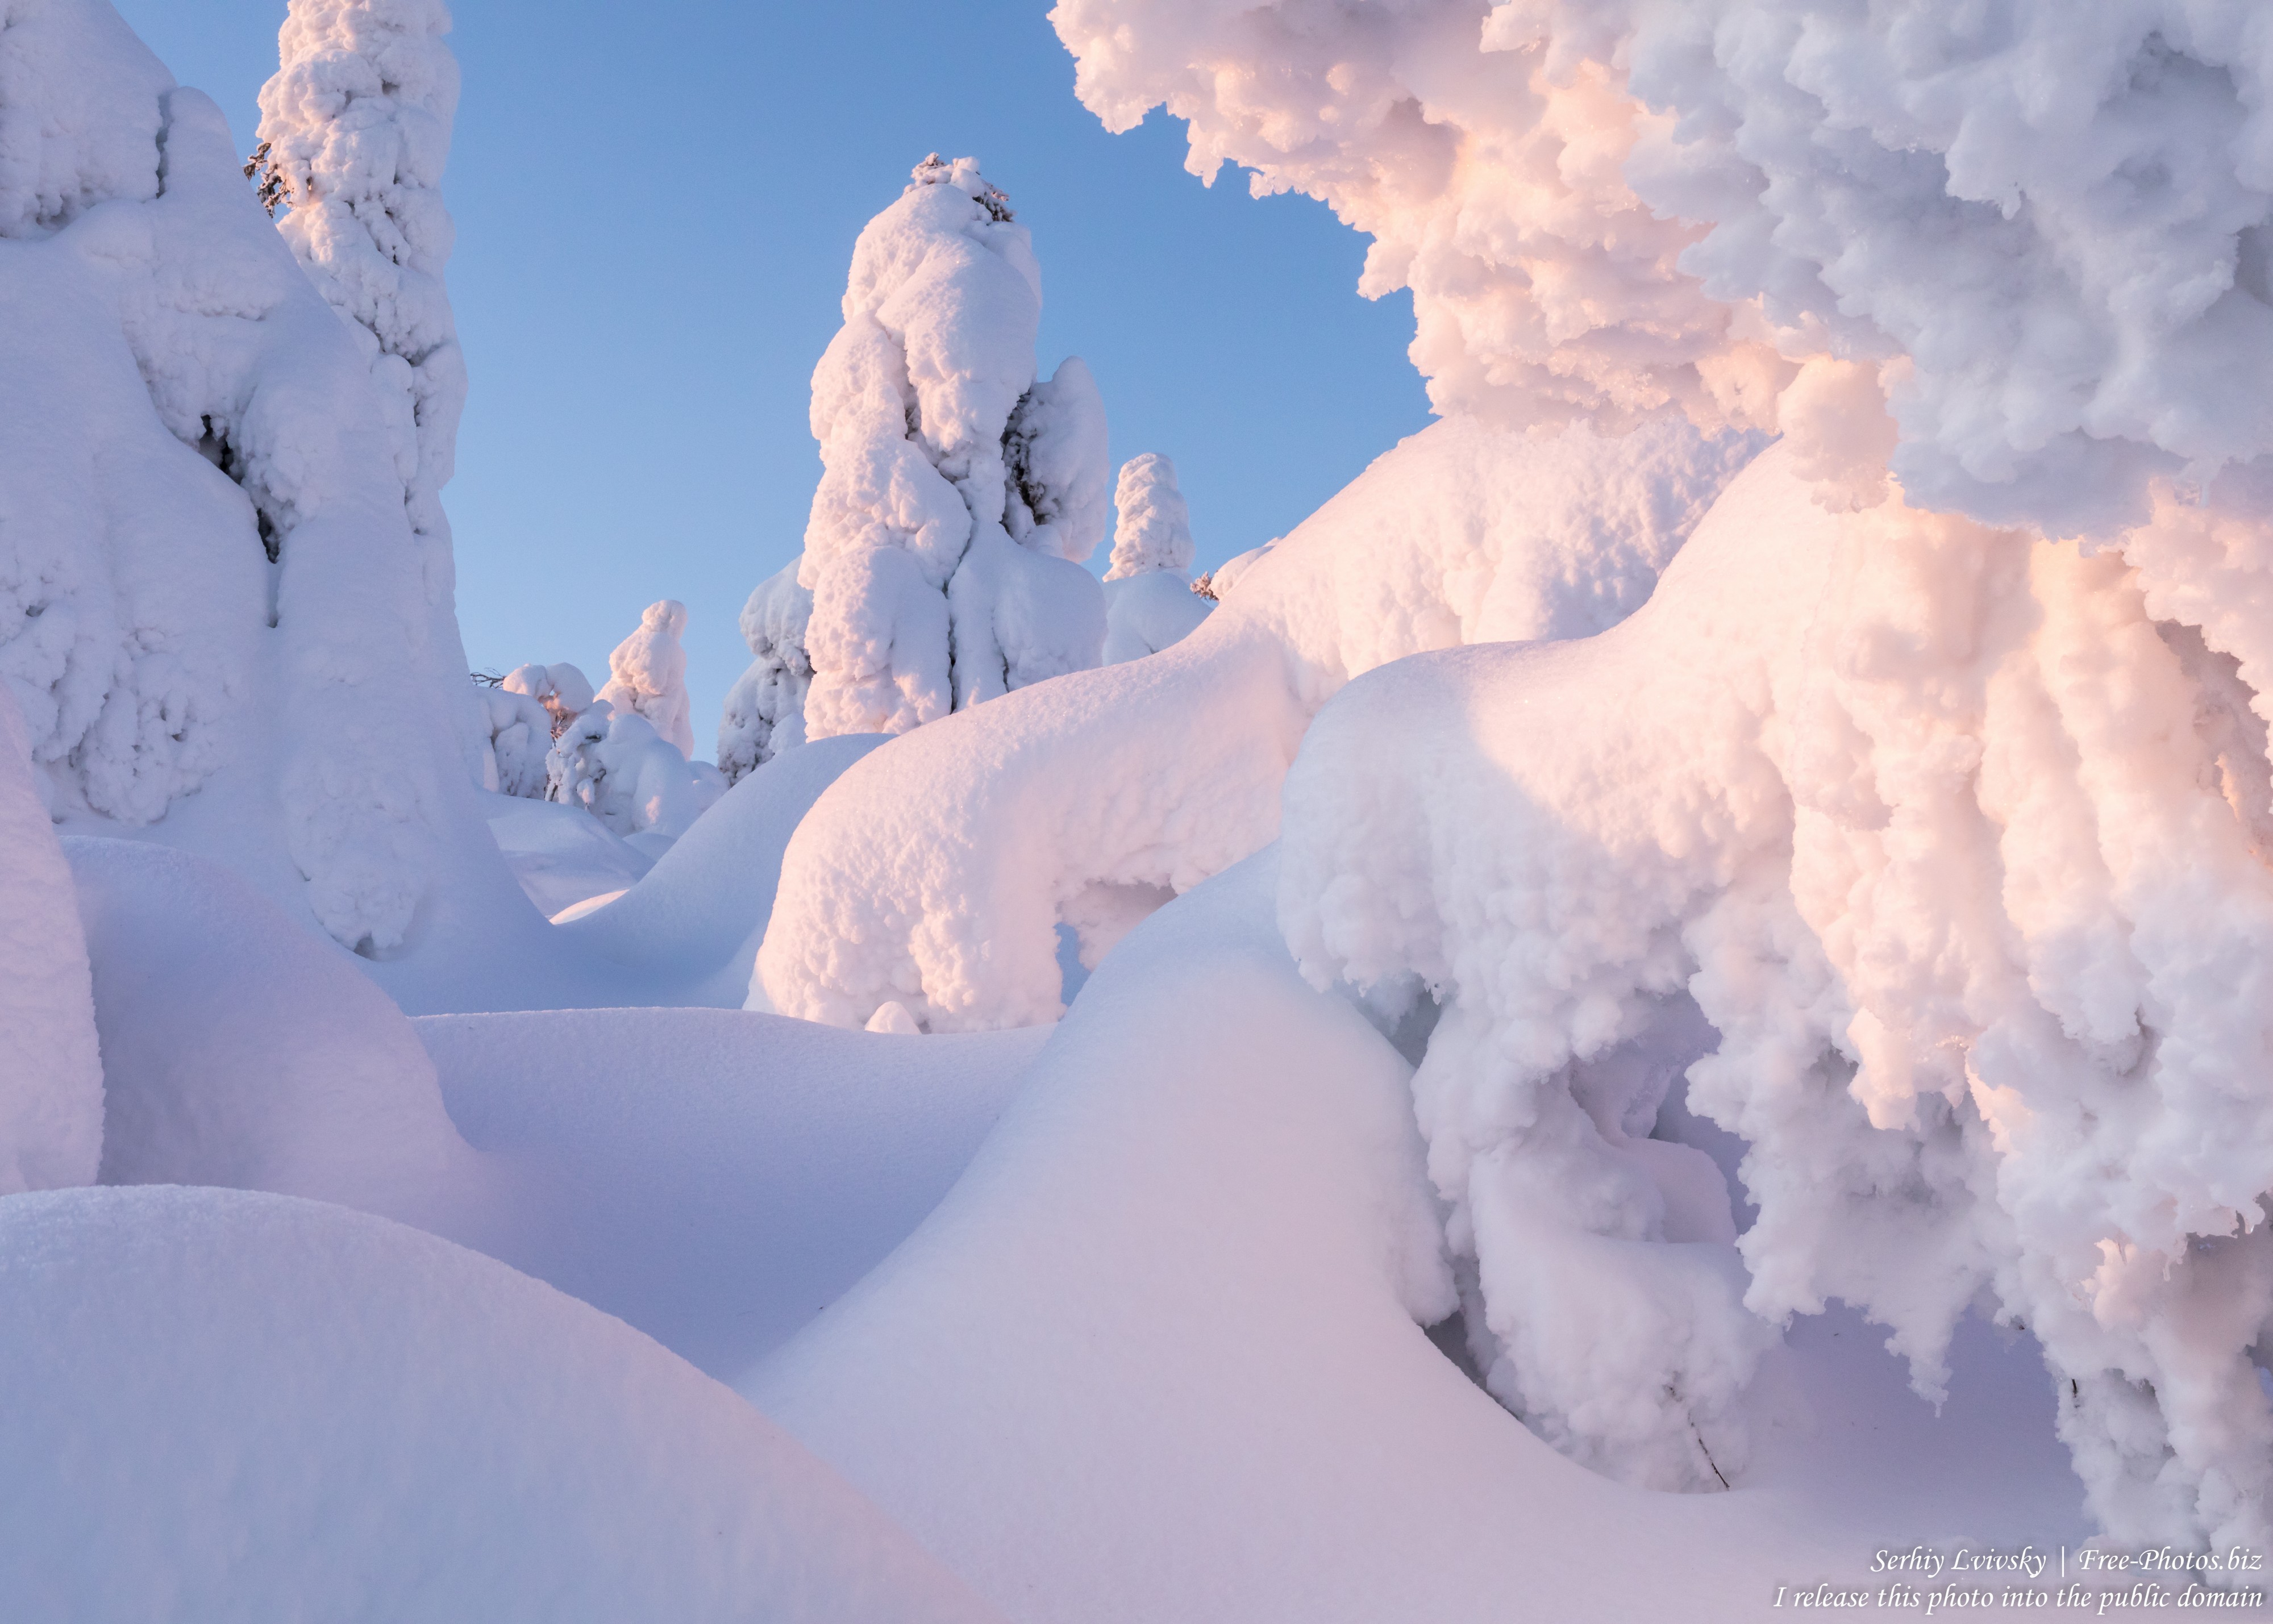 Valtavaara, Finland, photographed in January 2020 by Serhiy Lvivsky, picture 25